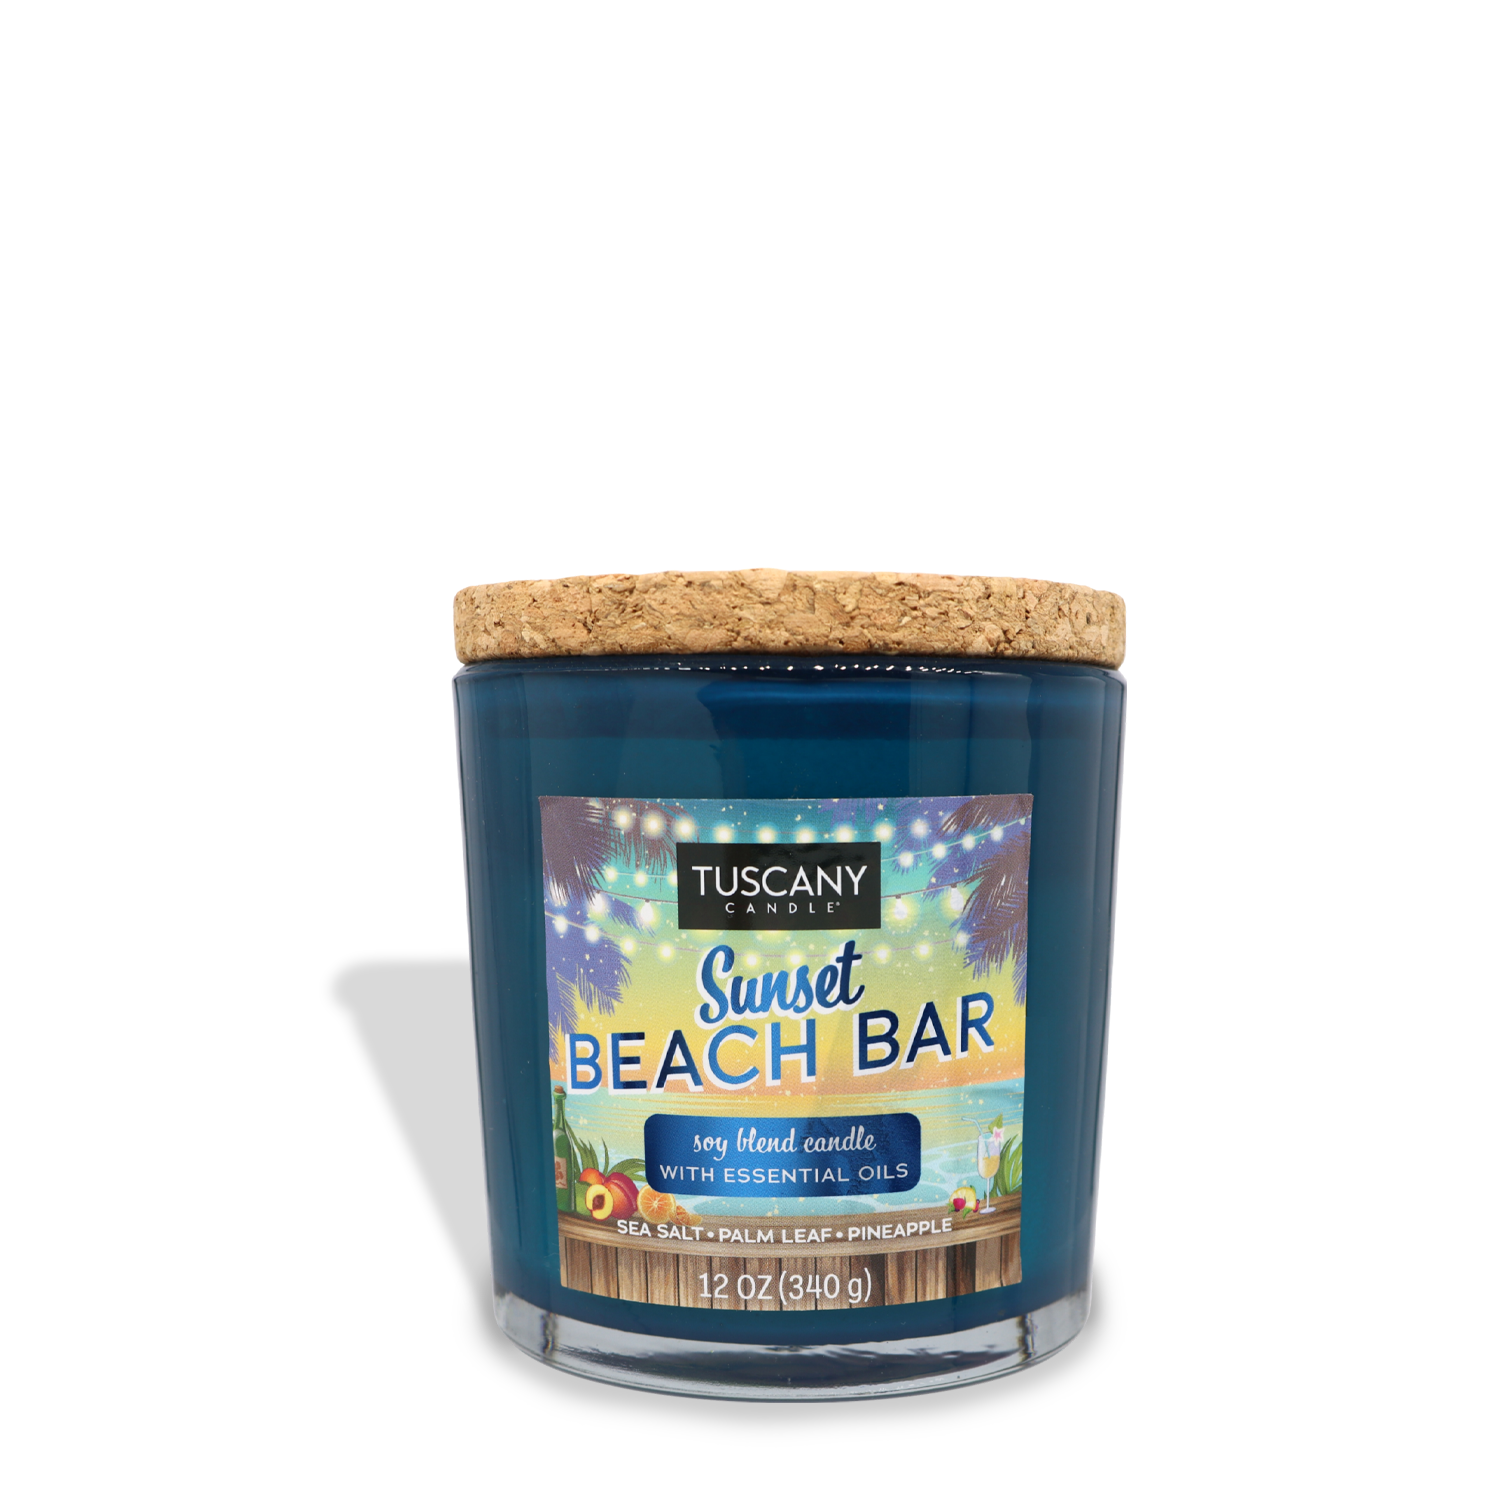 A Tuscany Candle® SEASONAL labeled "Sunset Beach Bar," featuring a blue soy blend wax and essential oils, with sea salt, palm leaf, and pineapple scents. Topped with a cork lid, this Sunset Beach Bar (12 oz) – Sunset Beach Bar Collection candle offers a refreshing coastal experience.